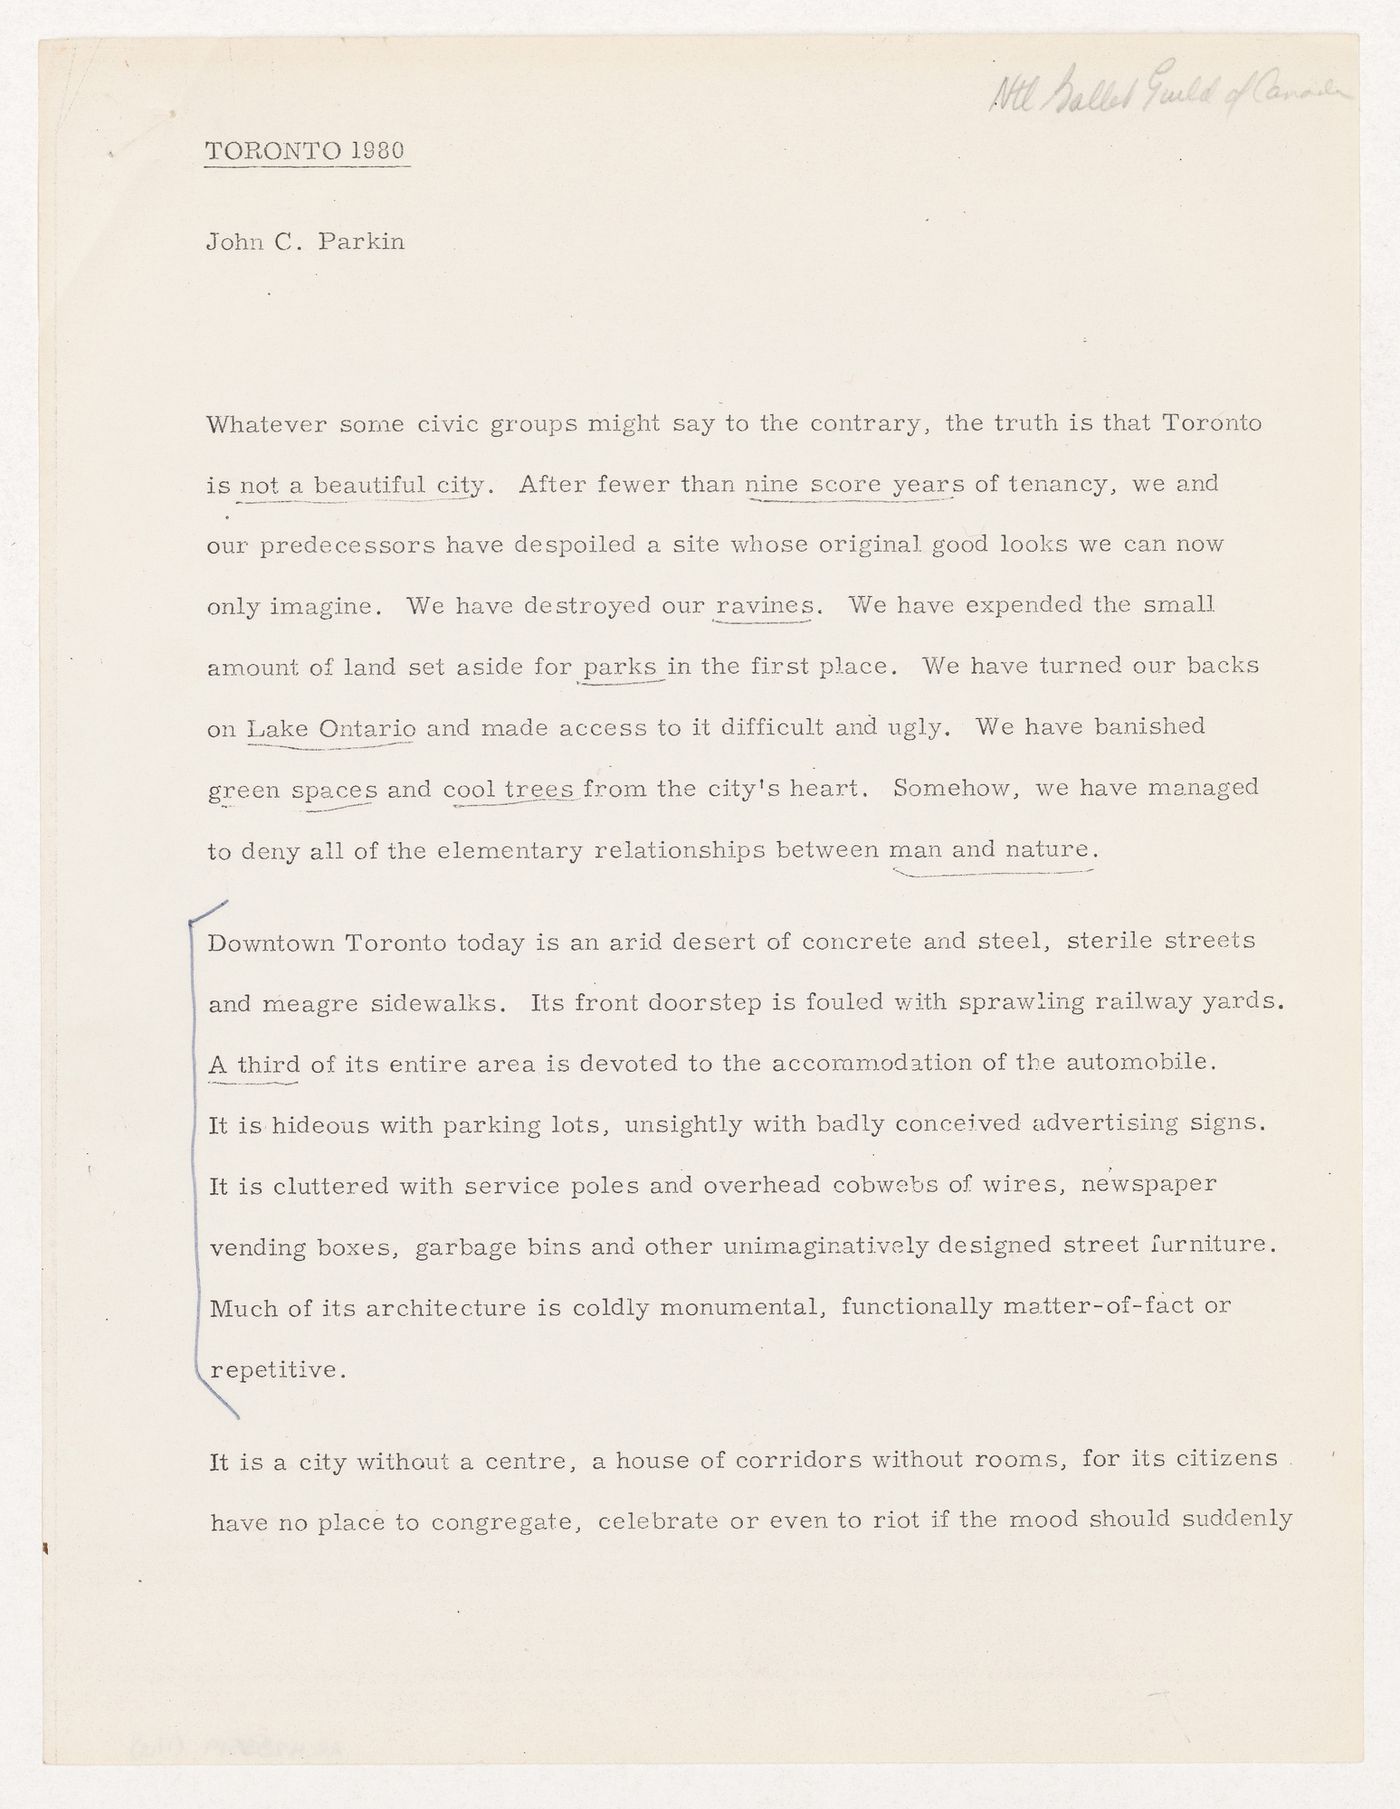 "Toronto 1980" speech by Parkin given to the Women's Committee at the National Ballet Guild of Canada